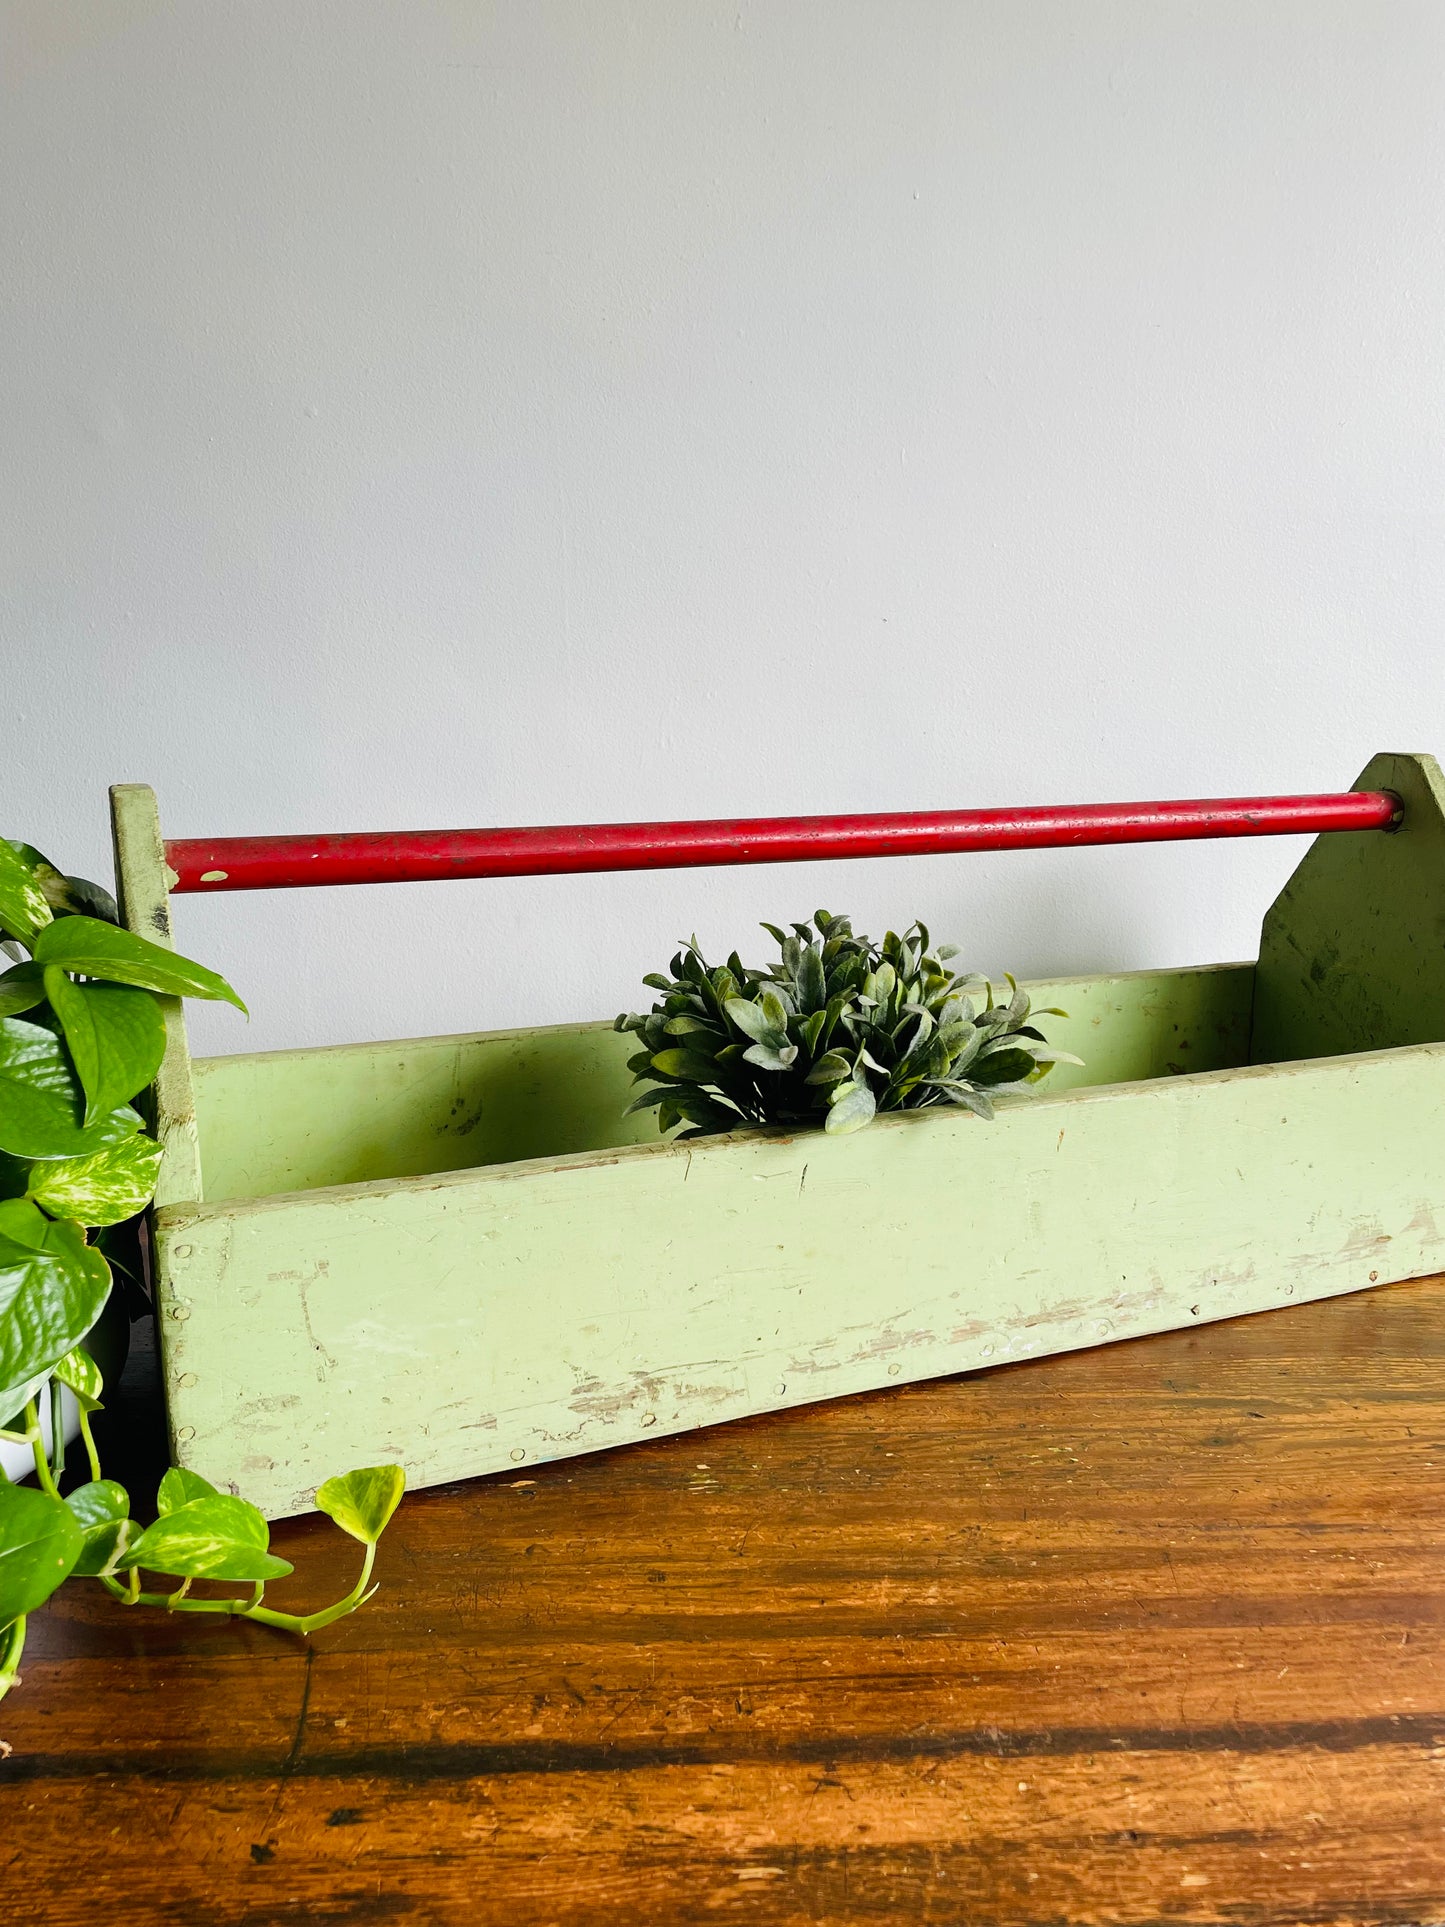 Giant Sage Green Wood Toolbox with Red Metal Handle - Makes a Beautiful Planter Box!